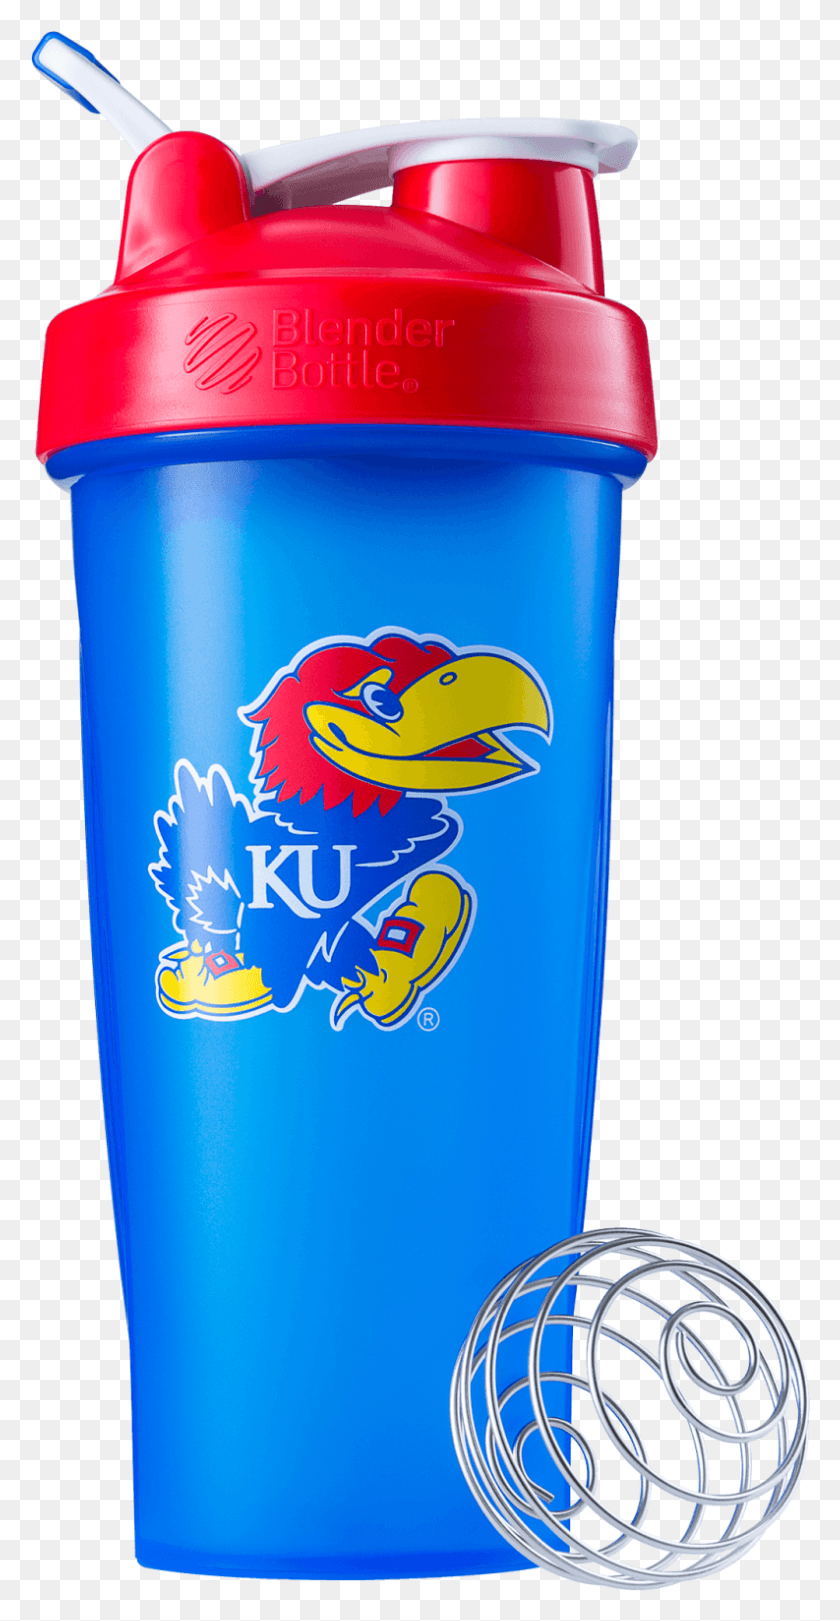 793x1588 Blenderbottle 28Oz Boise State Classic Shaker Cup With Iowa State Blender Bottle, Bird, Animal, Cilindro Hd Png